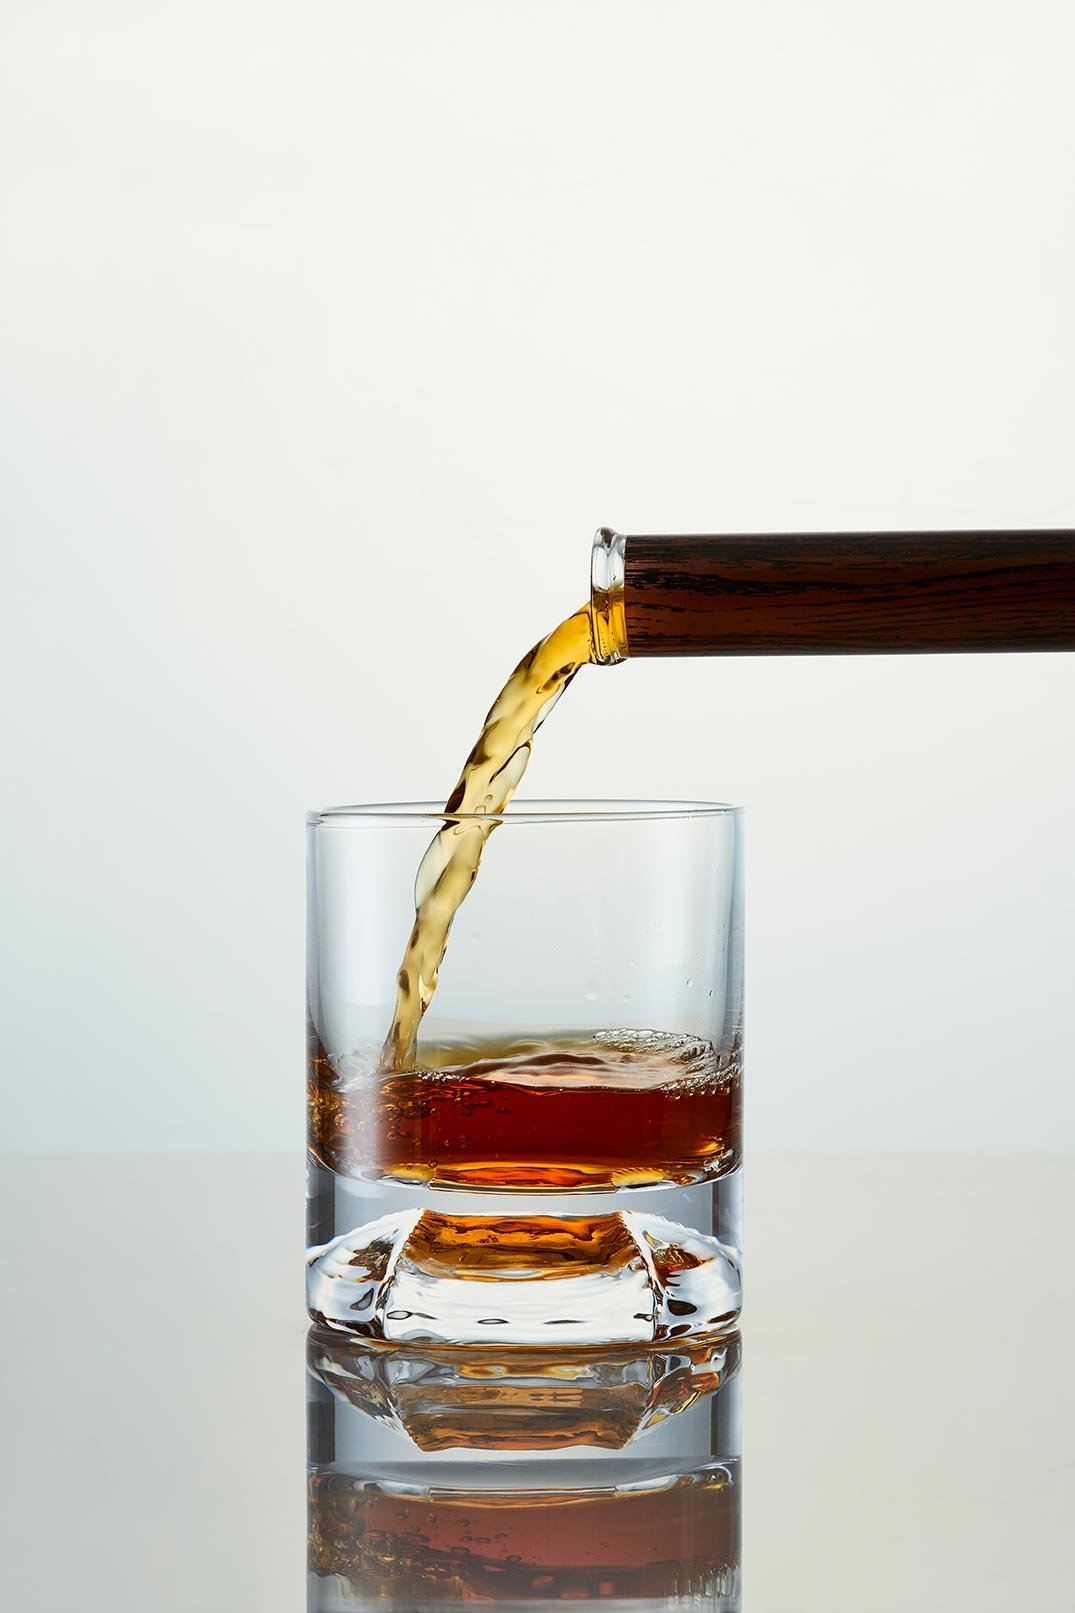 Whiskey-decanter-creative-product-photography-2.jpg